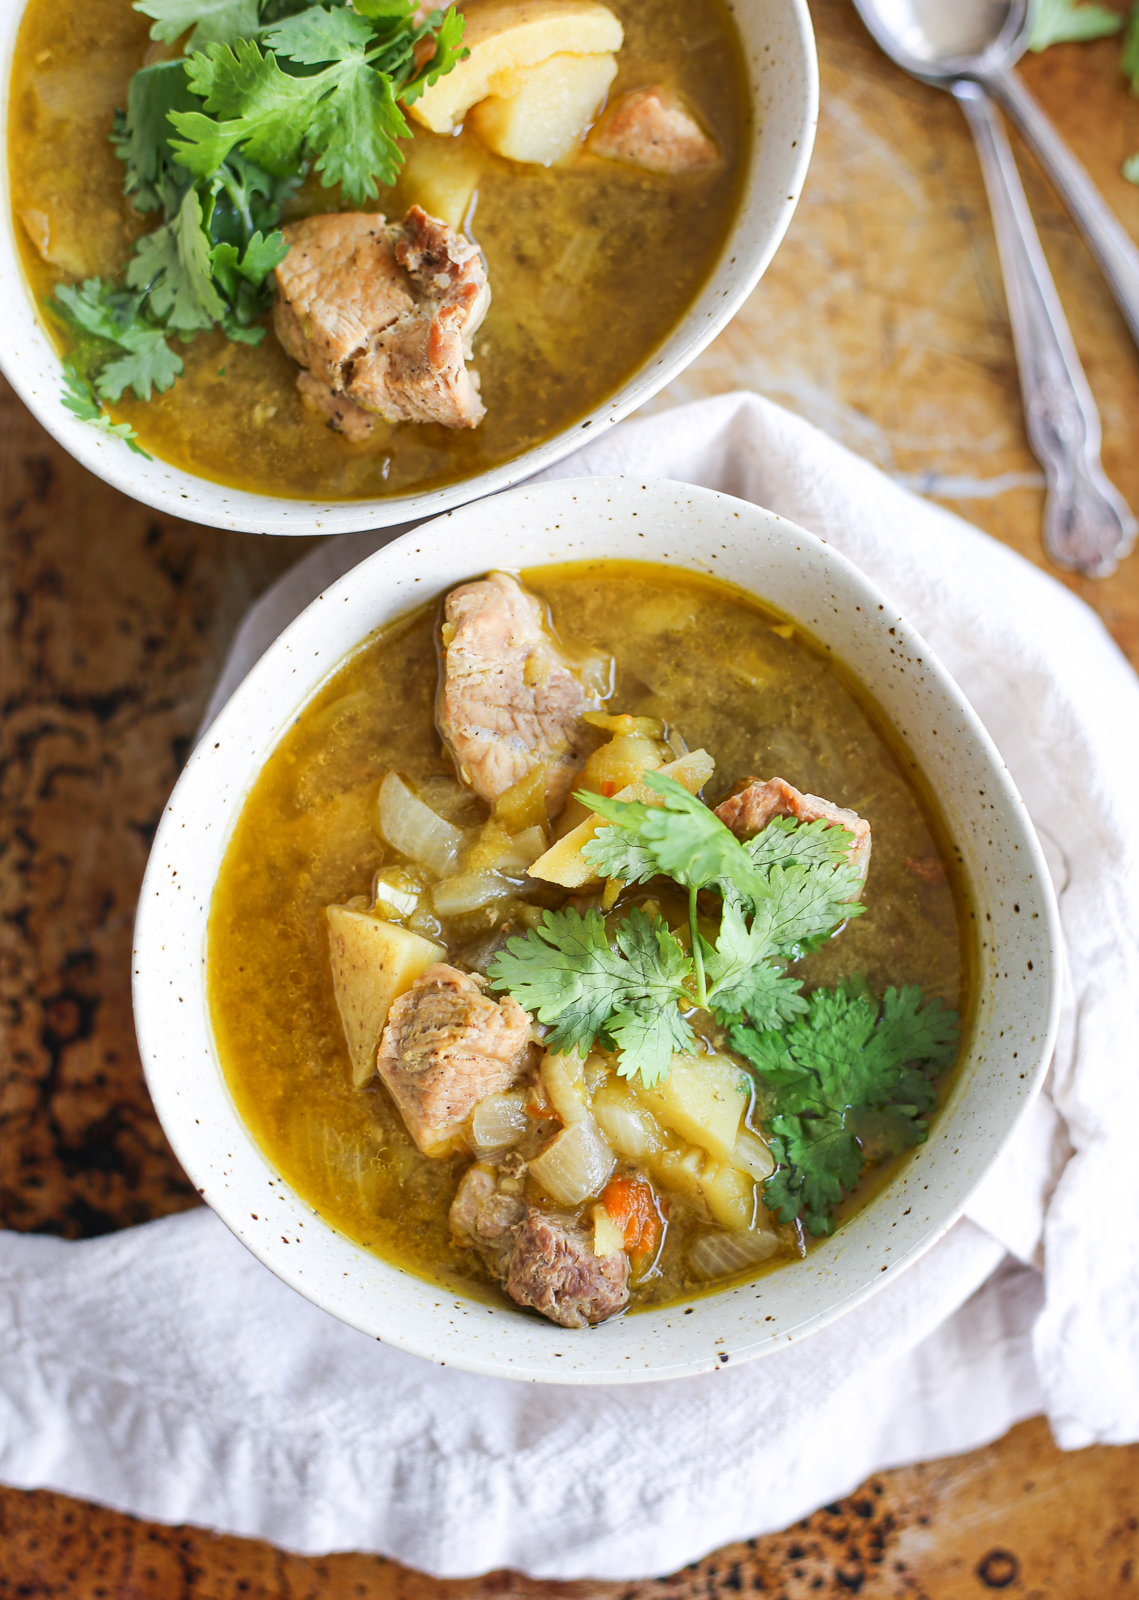 5 Ingredient Green Chile Stew from The Defined Dish